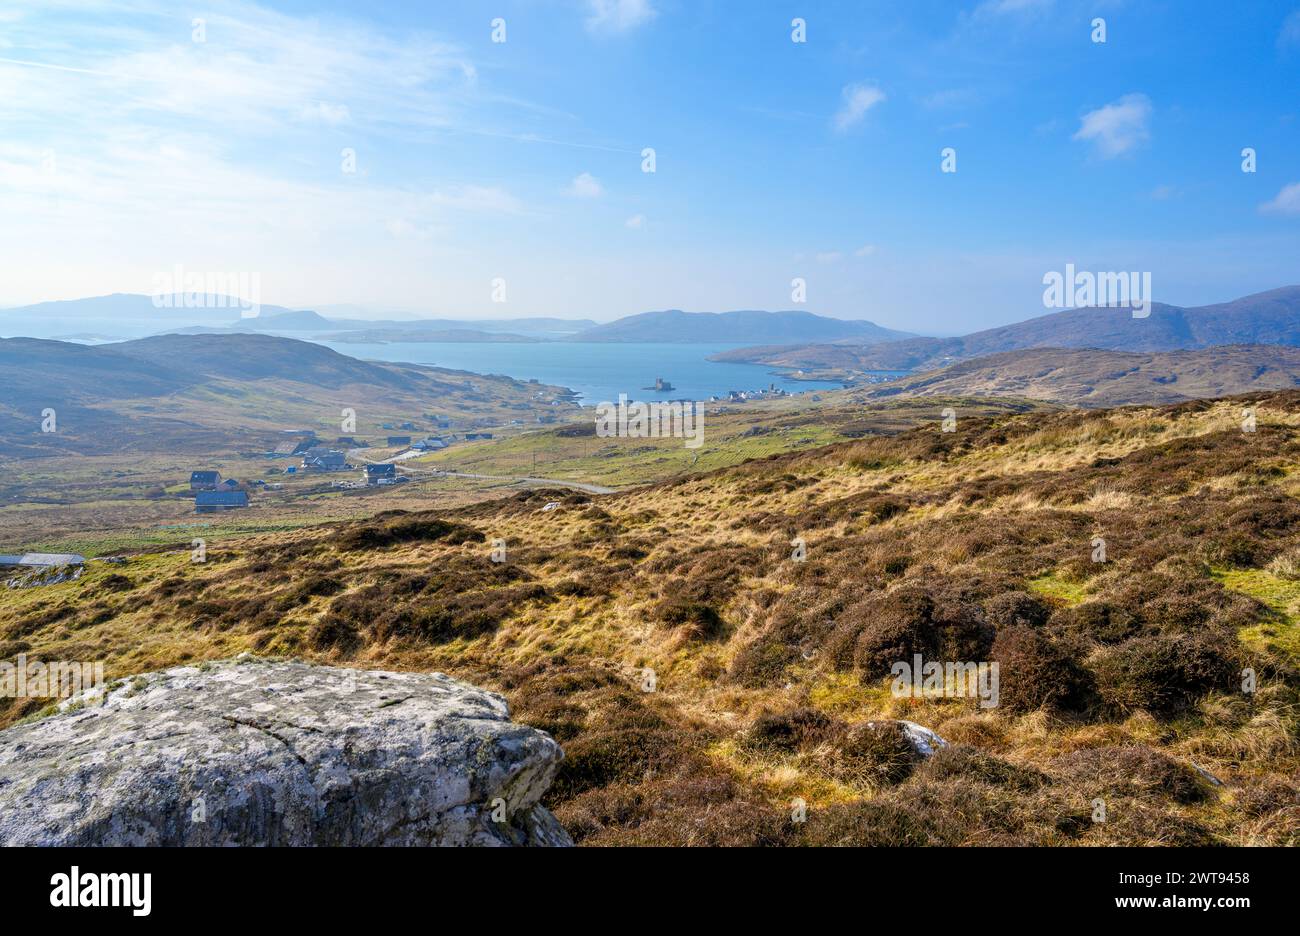 View over the village of Castlebay and Kisimul Castle from Heaval hill, Isle of Barra, Outer Hebrides, Scotland, UK Stock Photo